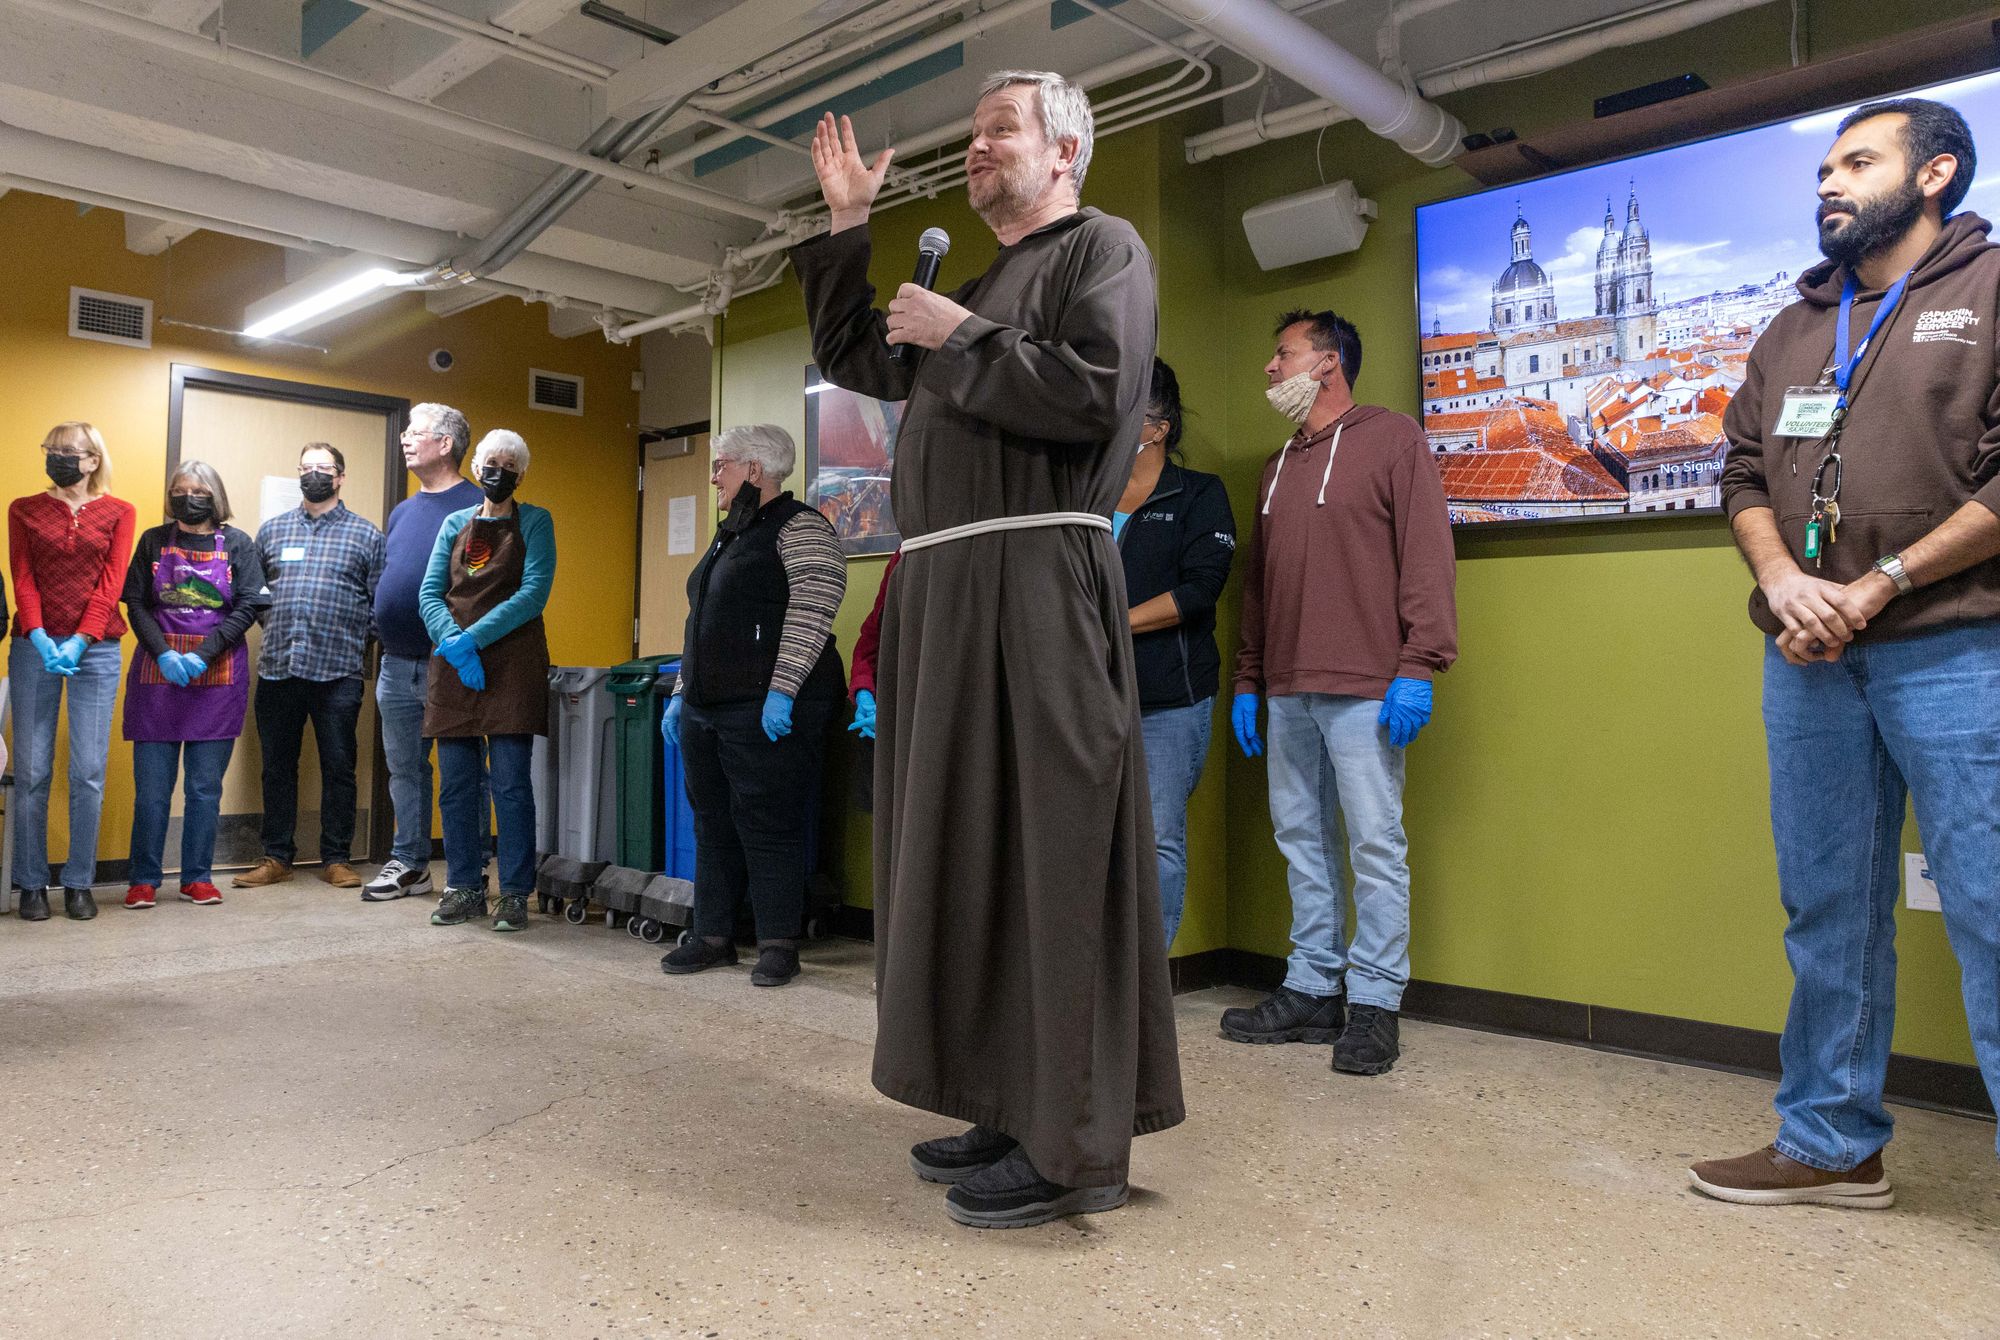 Br. Henryk Cisowski, wearing a brown Capuchin Franciscan habit and holding a microphone, offers the blessing before the meal at St. Ben's Community Meal.